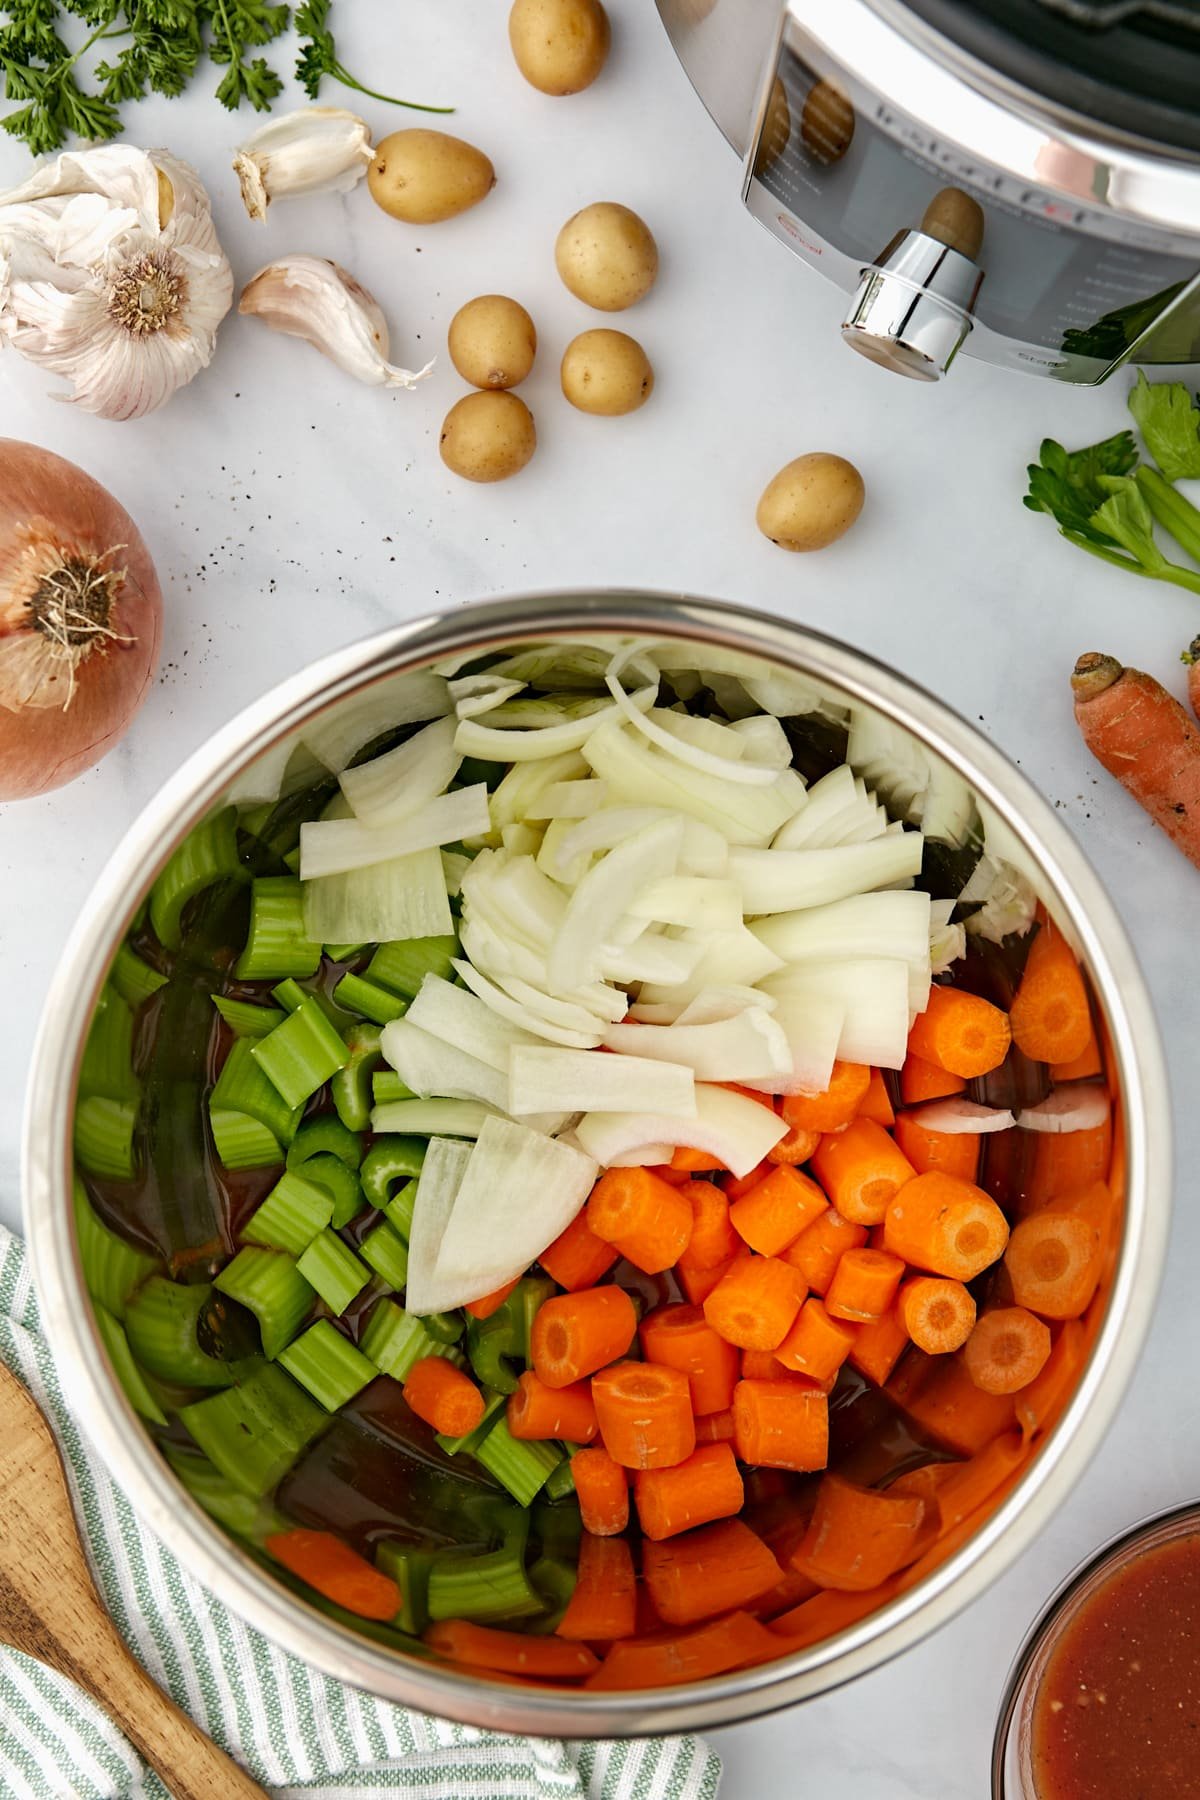 An Instant Pot filled with vegetables.